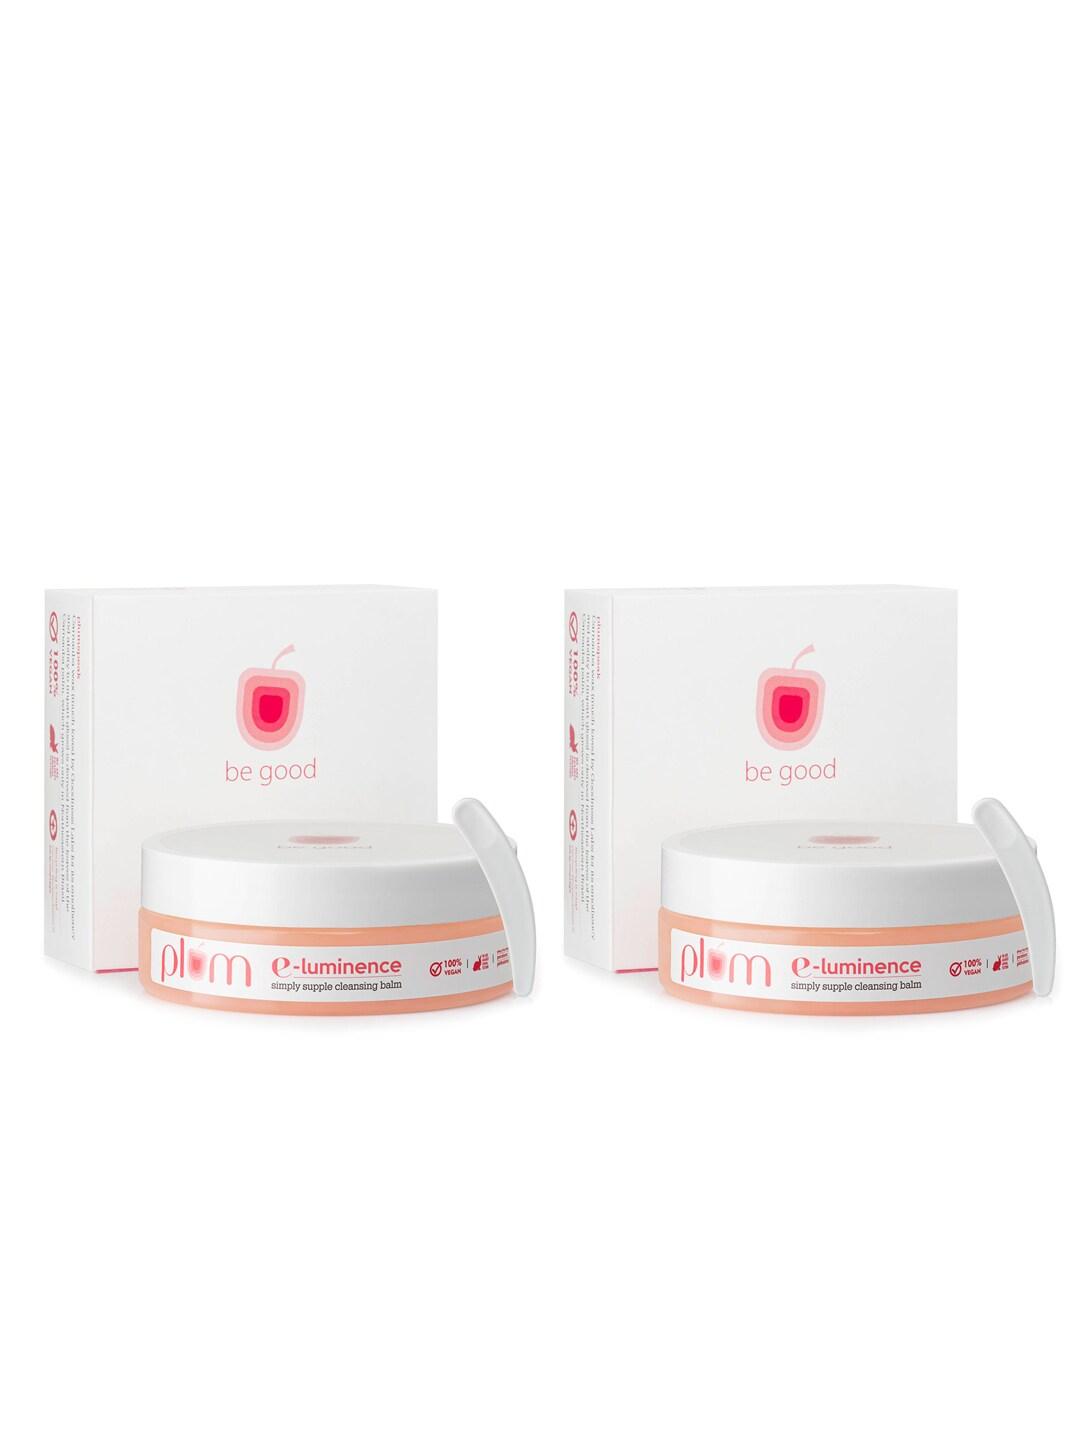 plum set of 2 e-luminence simply supple cleansing balm with vitamin e - 90g each